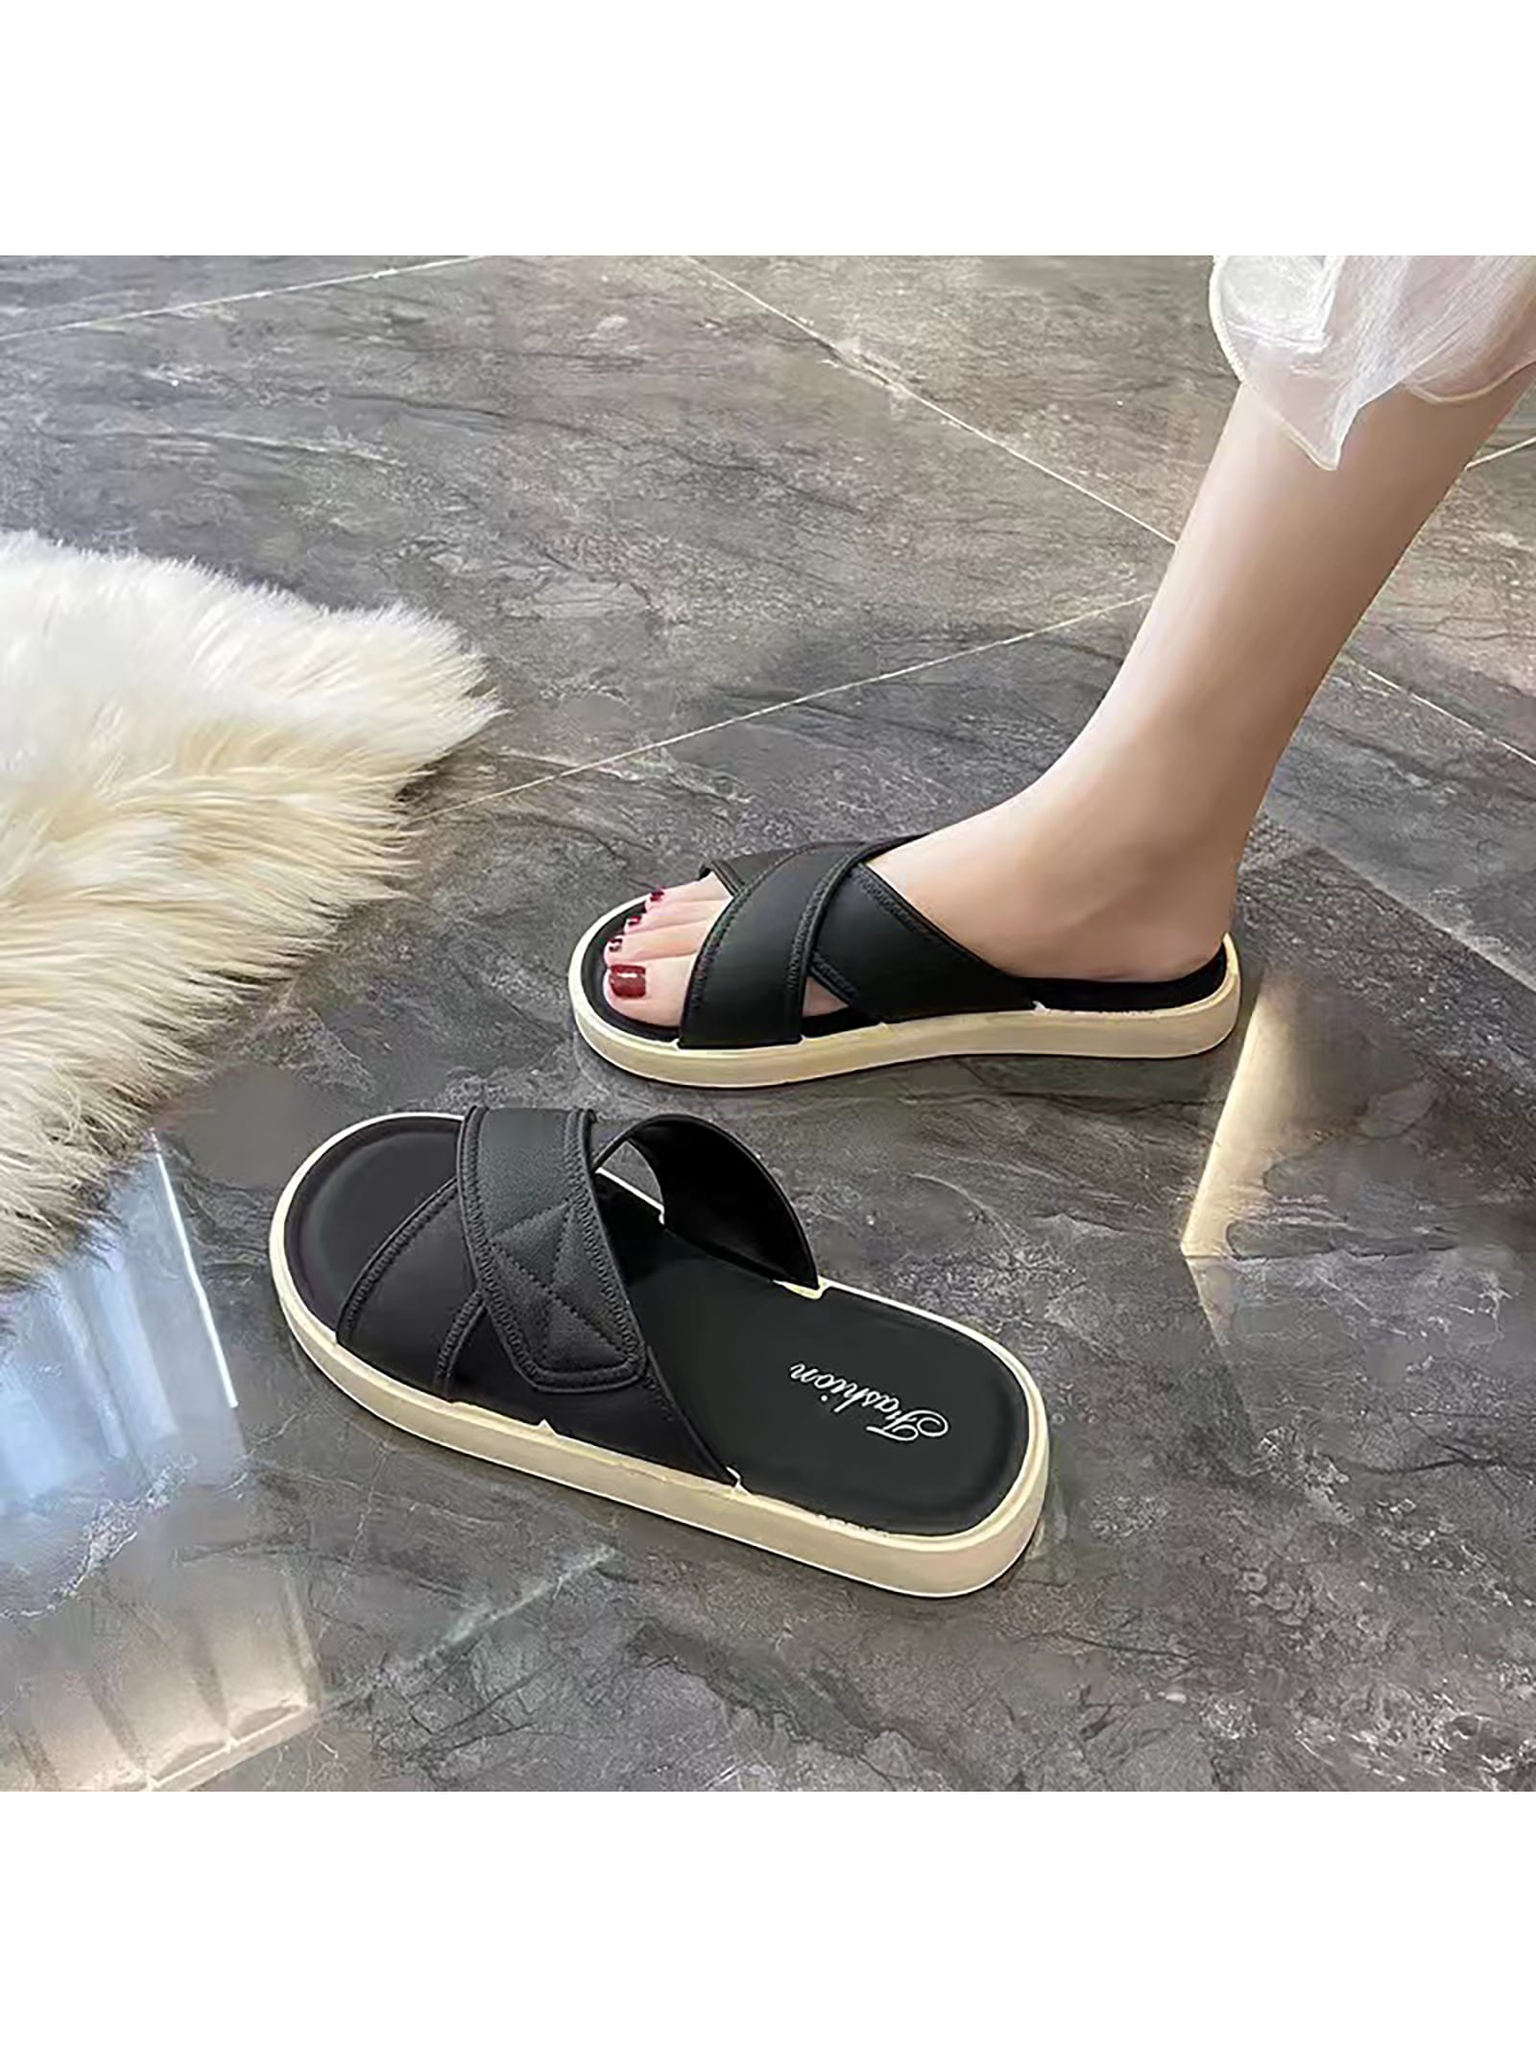 New Arrival Fashionable Simple Elegant Slippers For Home, Bathroom And Outdoor With Soft Pvc Slip-Resistant Bottom, Suitable For Indoor And Outdoor Wear, Fashion Style-Black-6